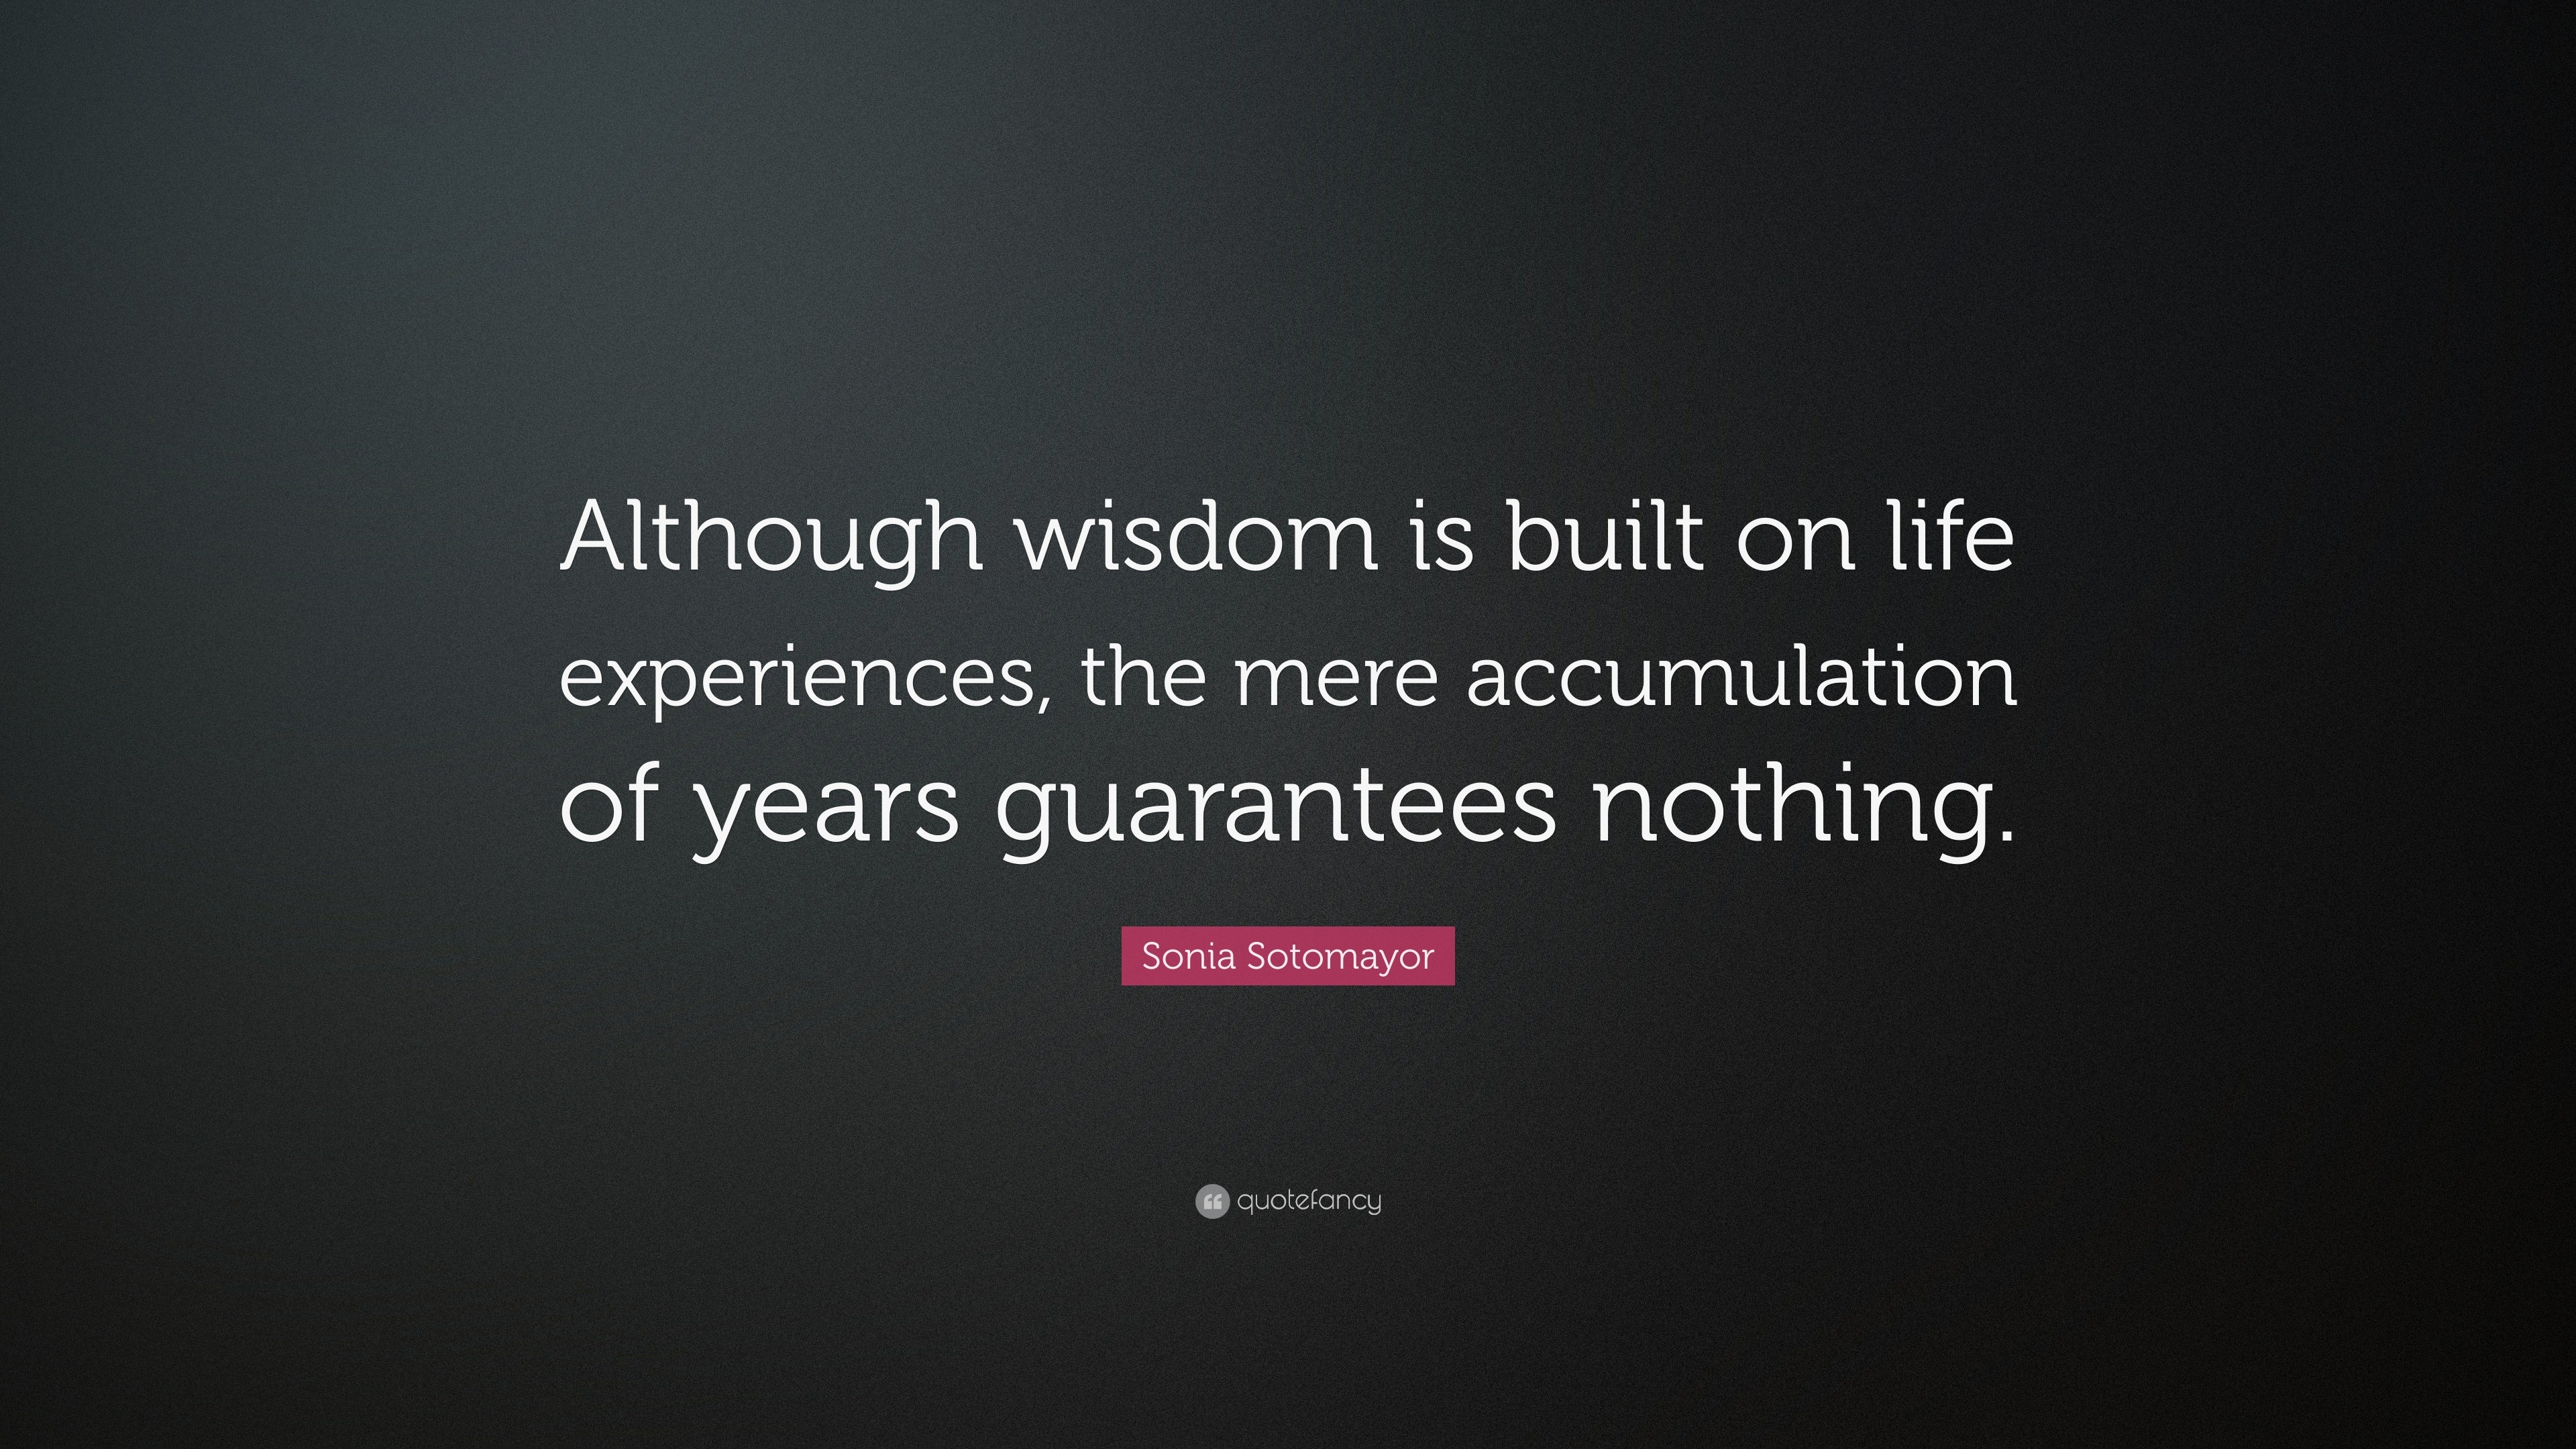 Sonia Sotomayor Quote: “Although wisdom is built on life experiences ...